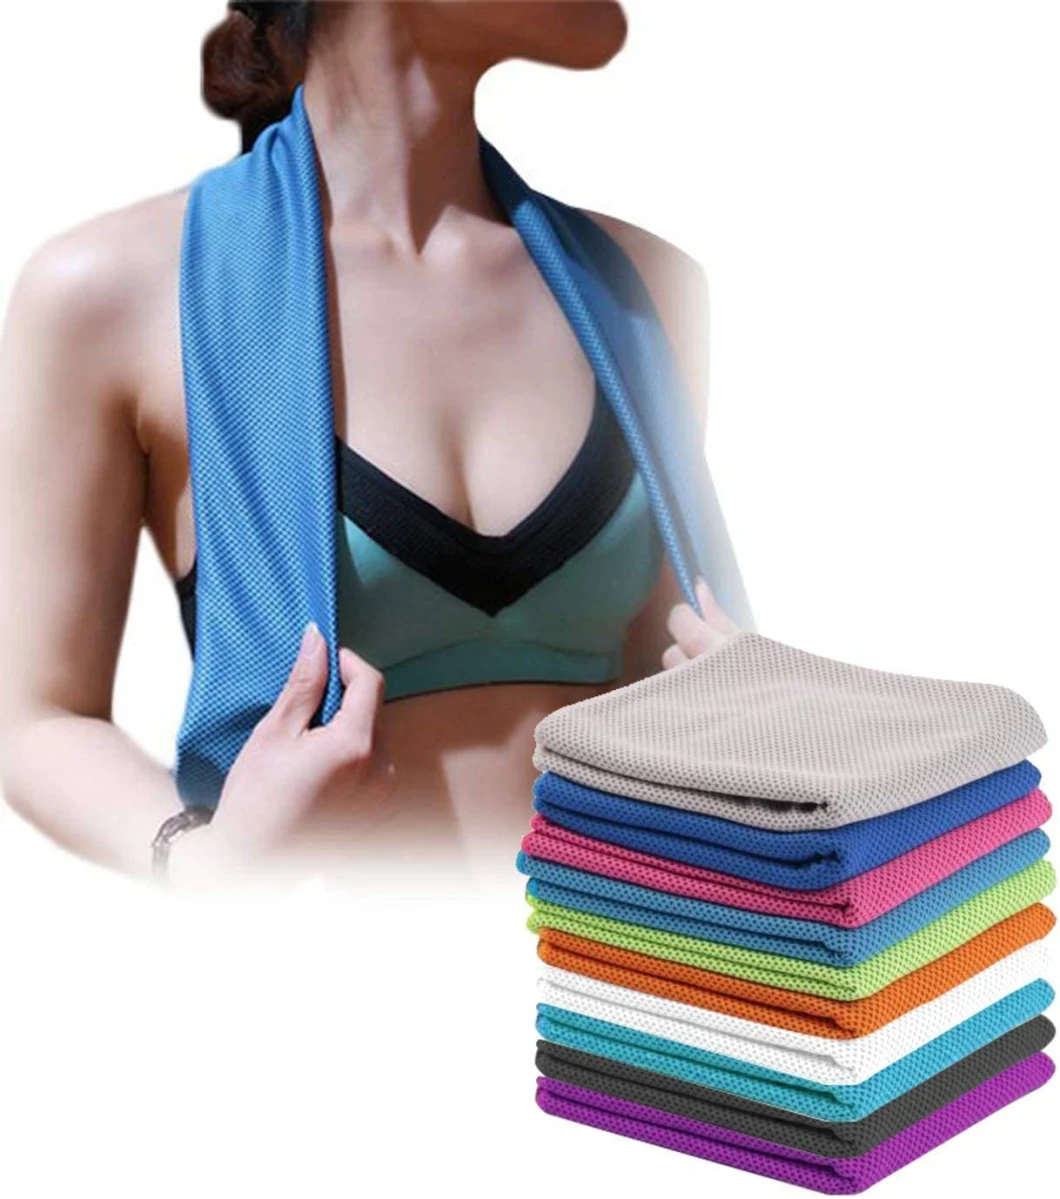 Cooling Towel, Ice Towel, Microfiber Towel, Soft Breathable Chilly Towel Stay Cool for Yoga, Sport, Gym, Workout, Camping, Fitness, Running